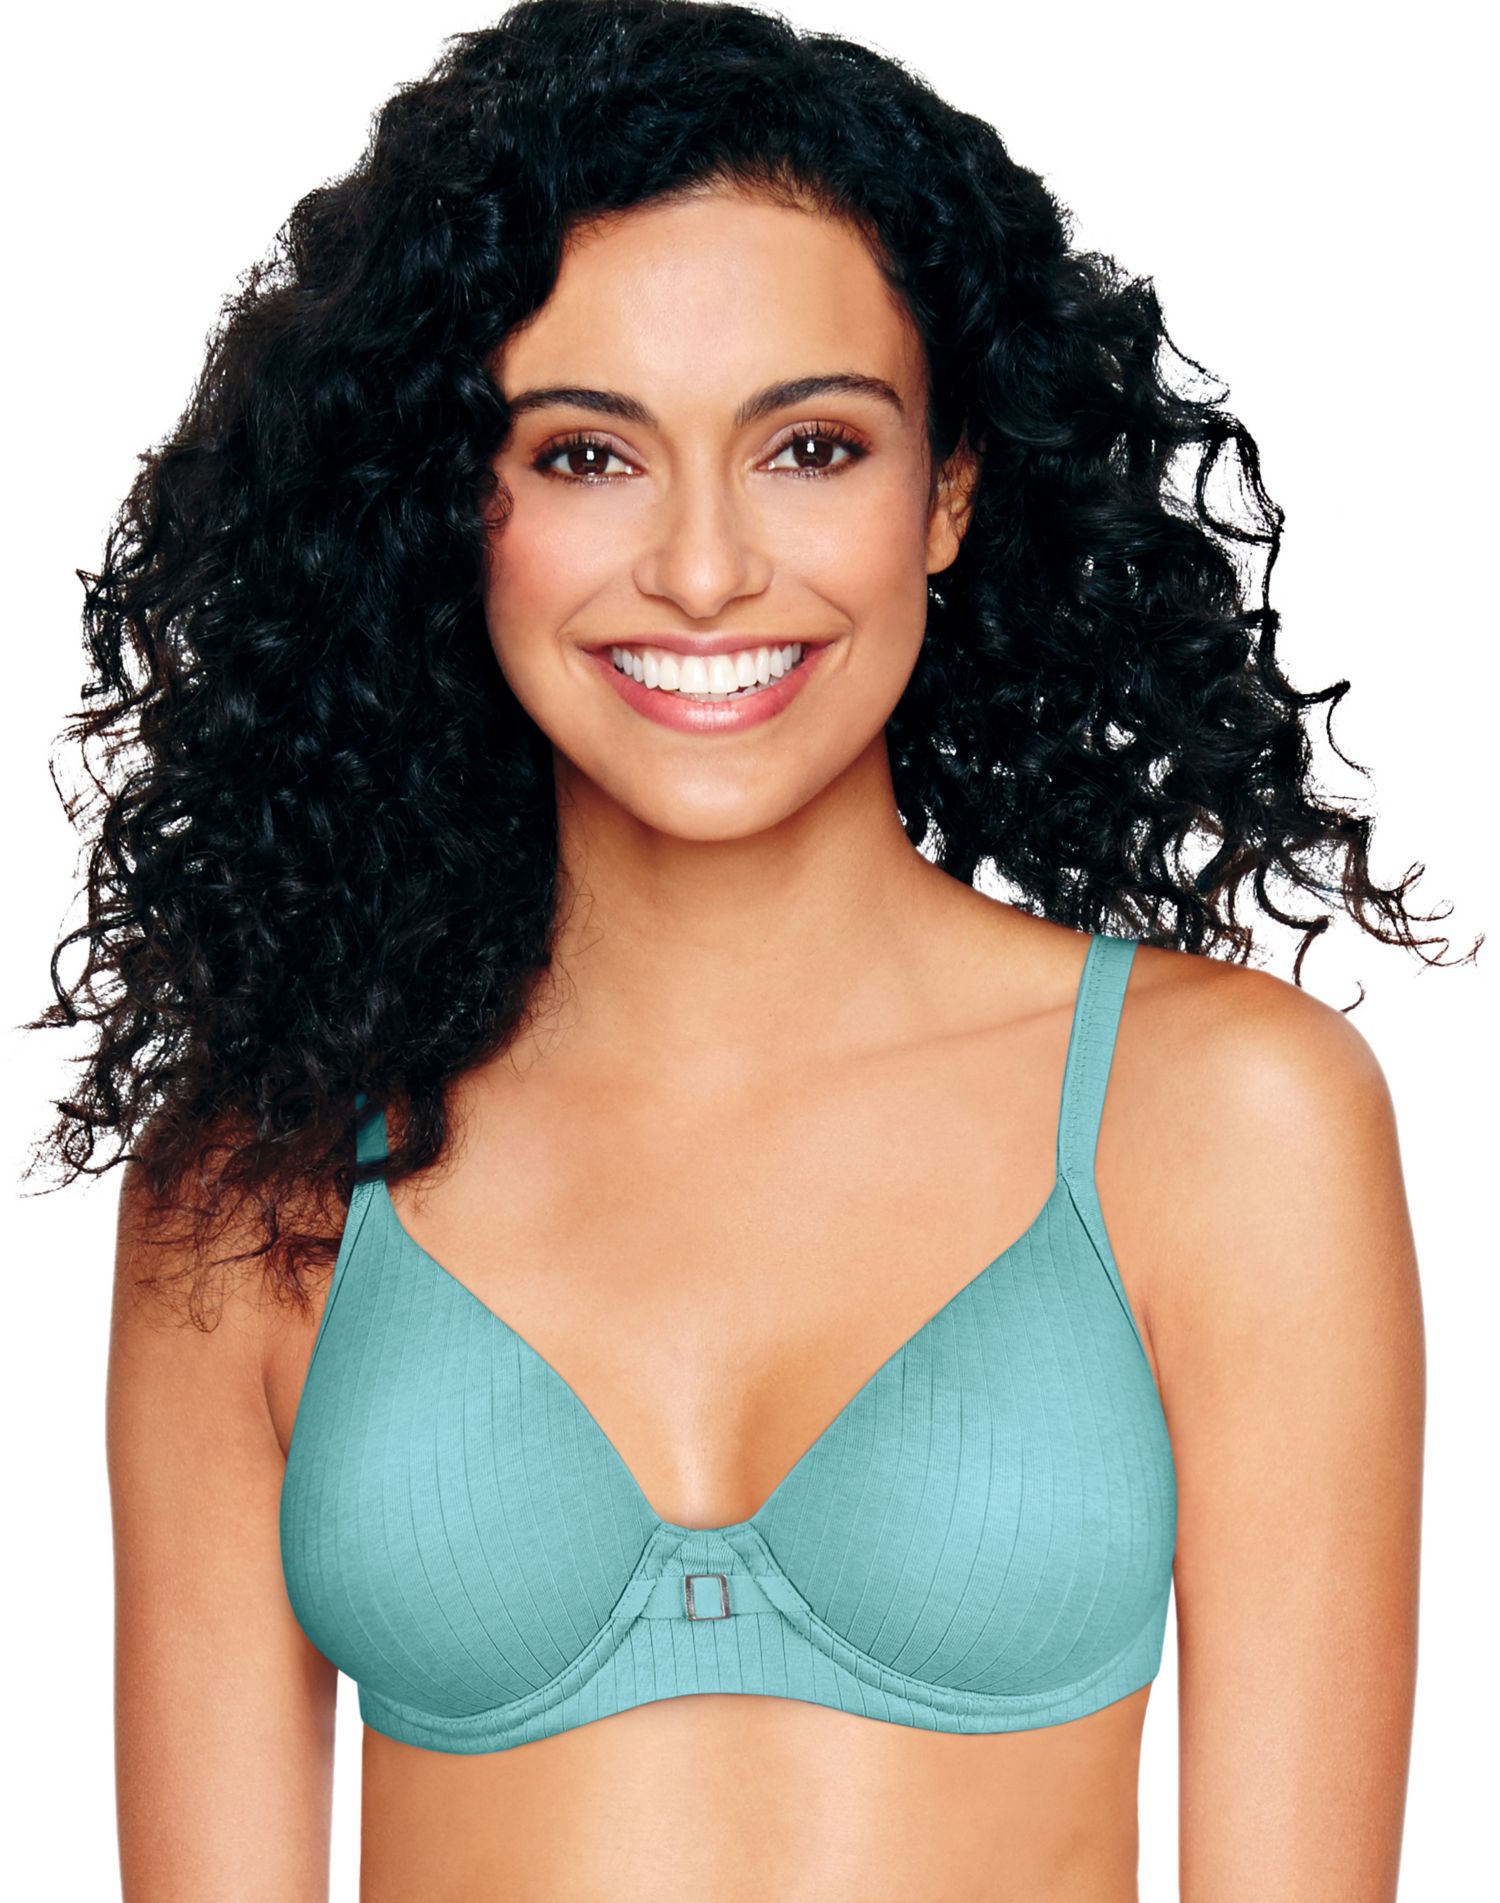 Hanes Womens Ultimate® ComfortBlend® T-Shirt Natural Lift Underwire Bra -  Apparel Direct Distributor